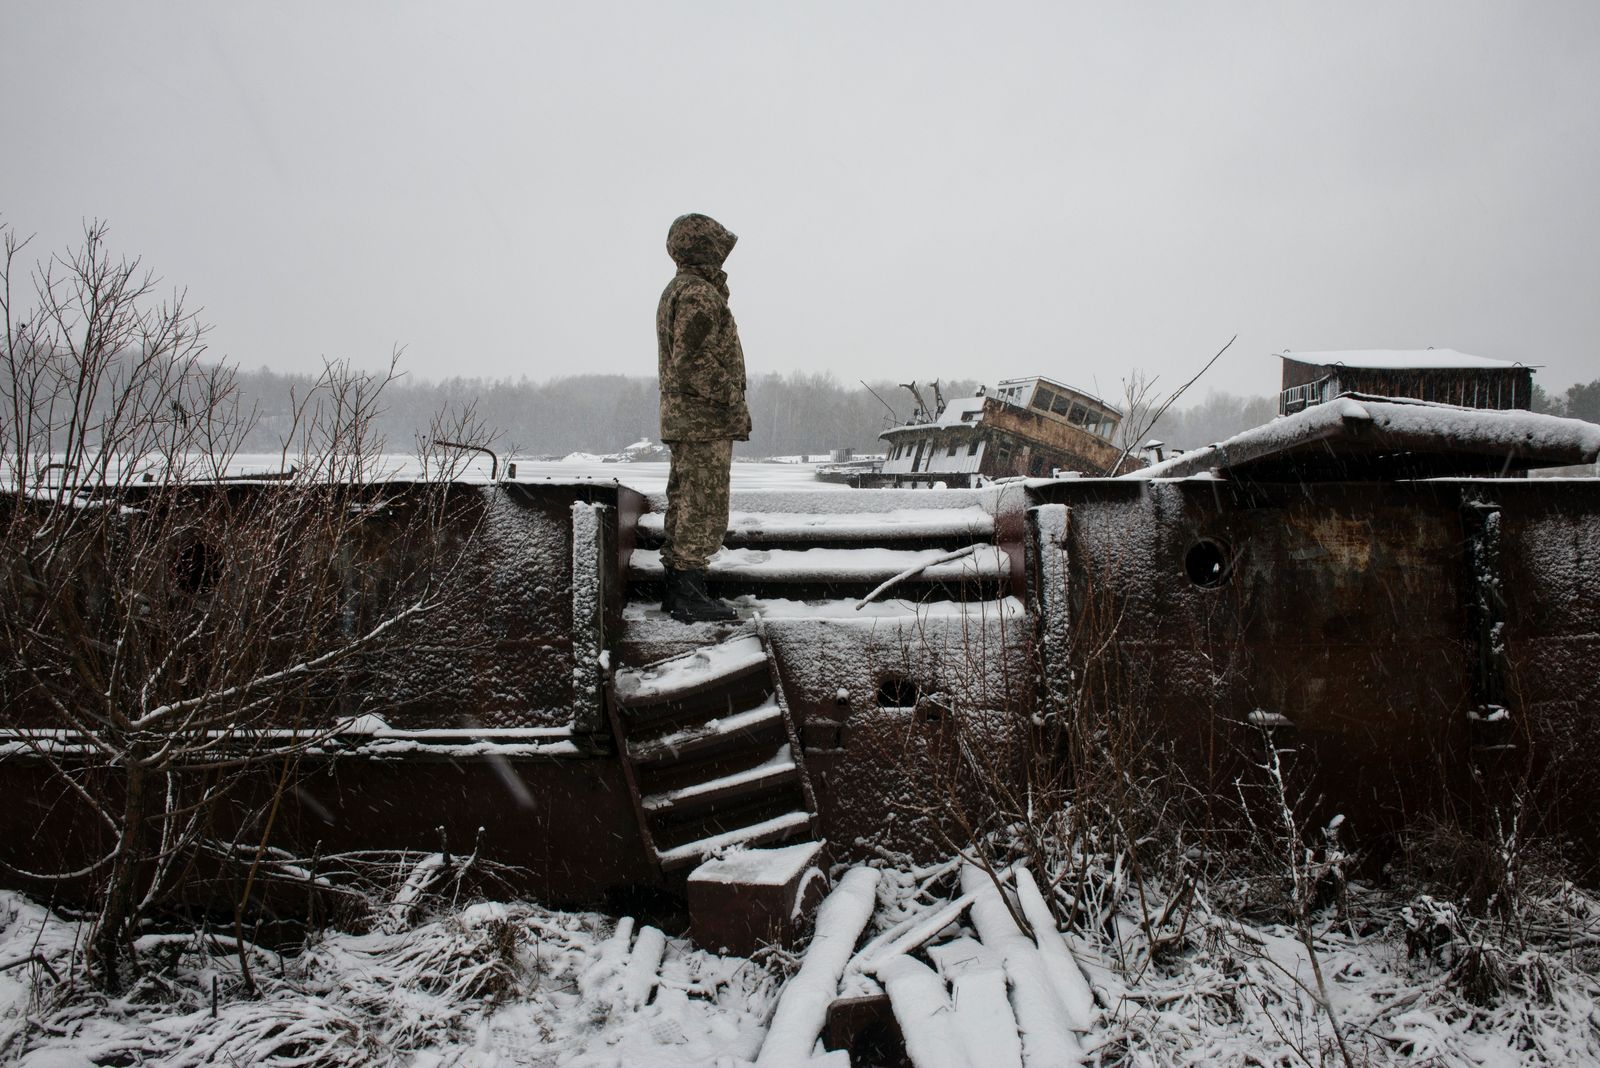 © Pierpaolo Mittica - in search of scrap metals in the Chernobyl river port